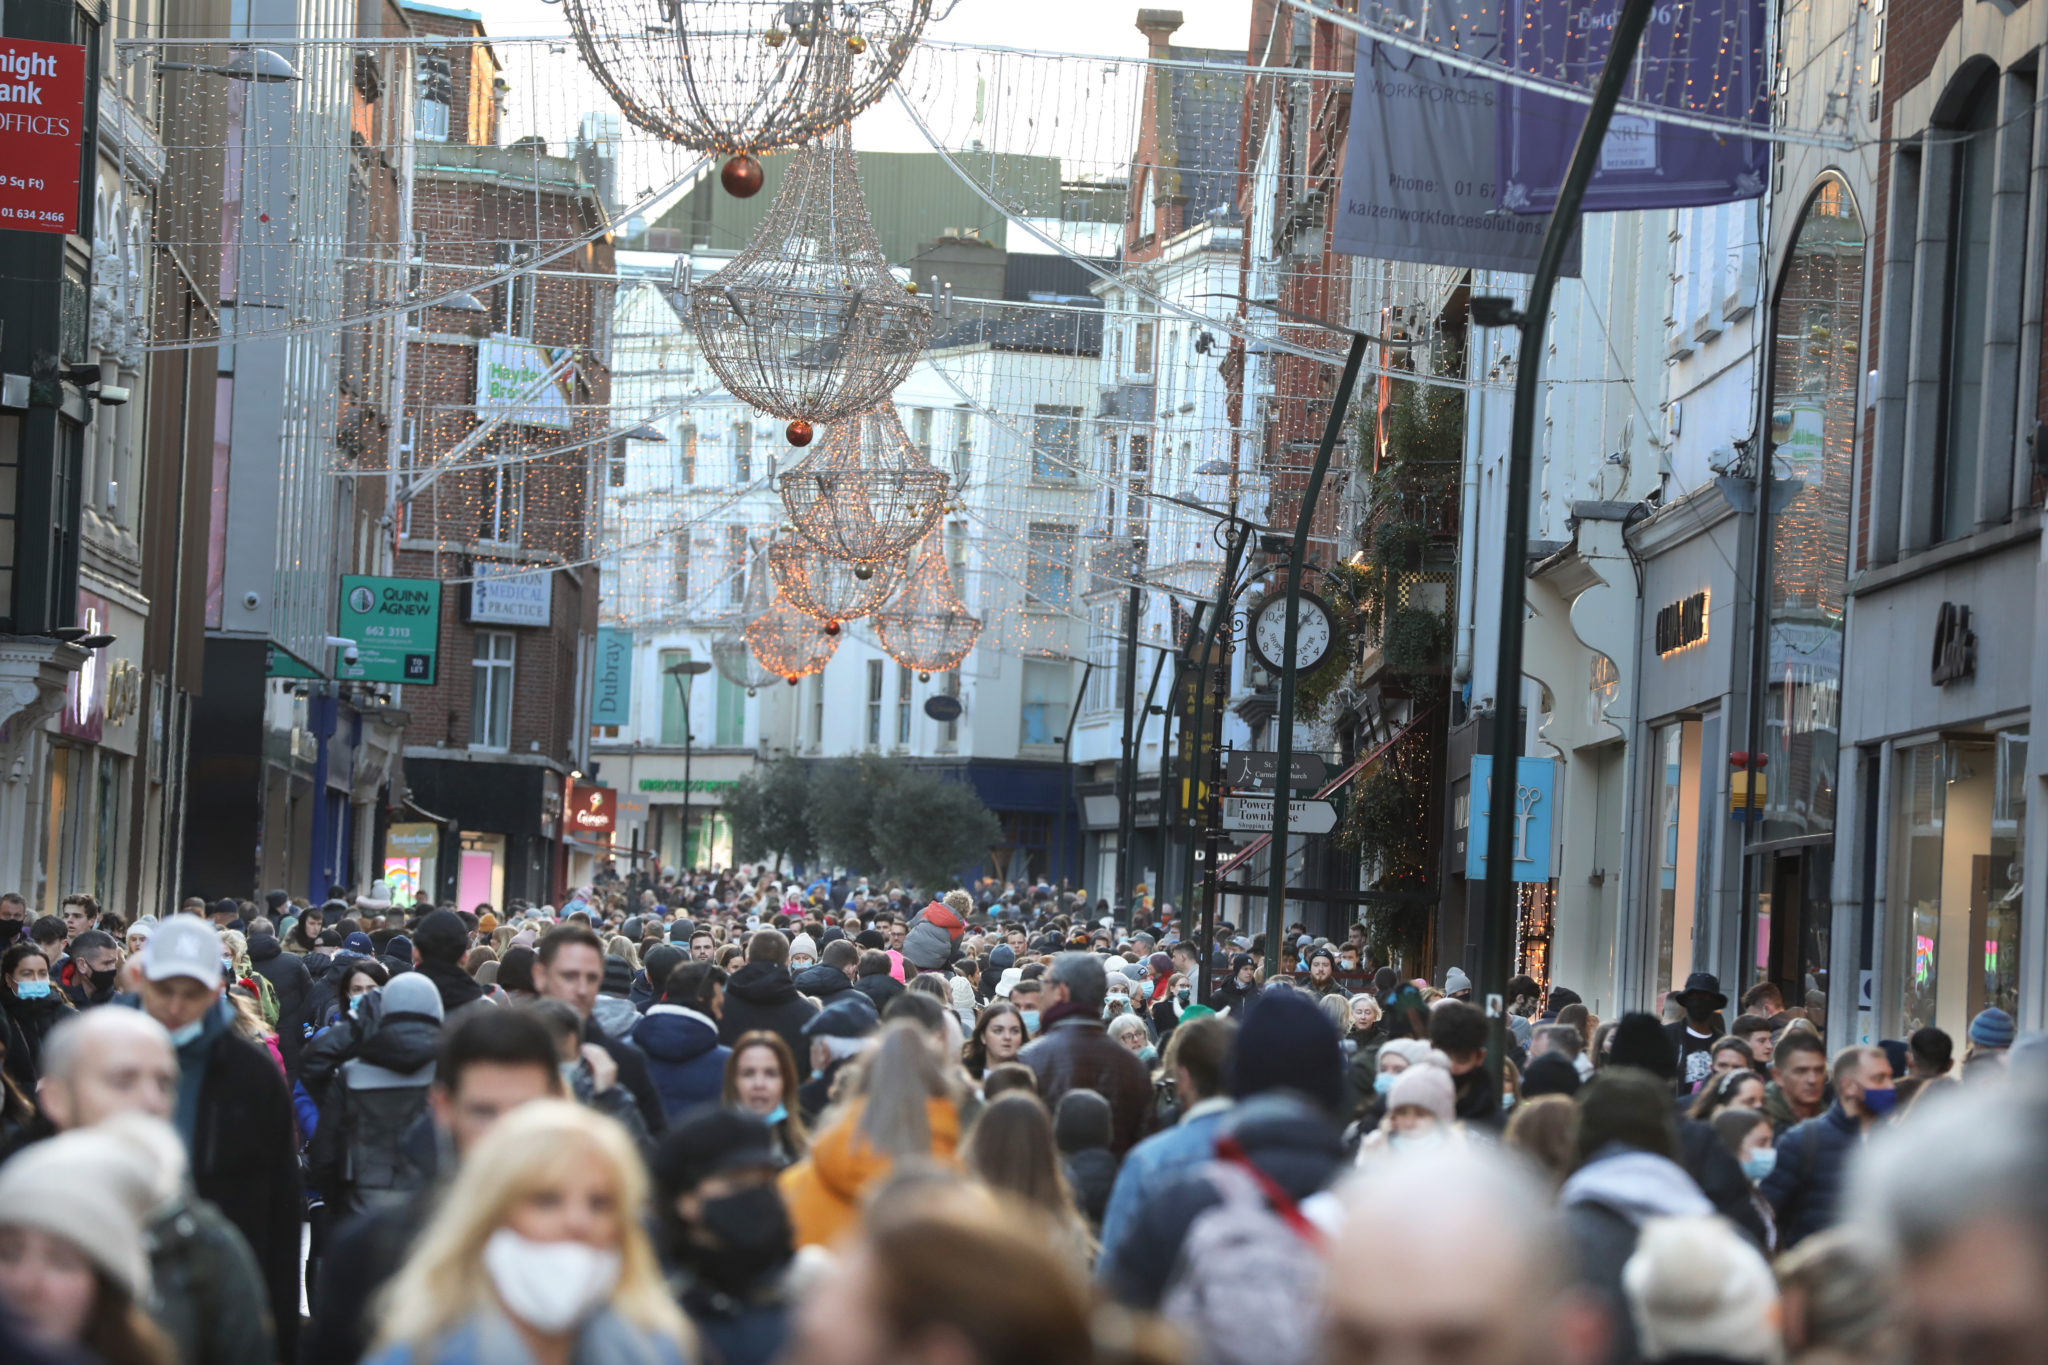 A packed Grafton Street as Christmas shoppers hit Dublin city centre, 04-12-2021. Image: Leah Farrell/RollingNews